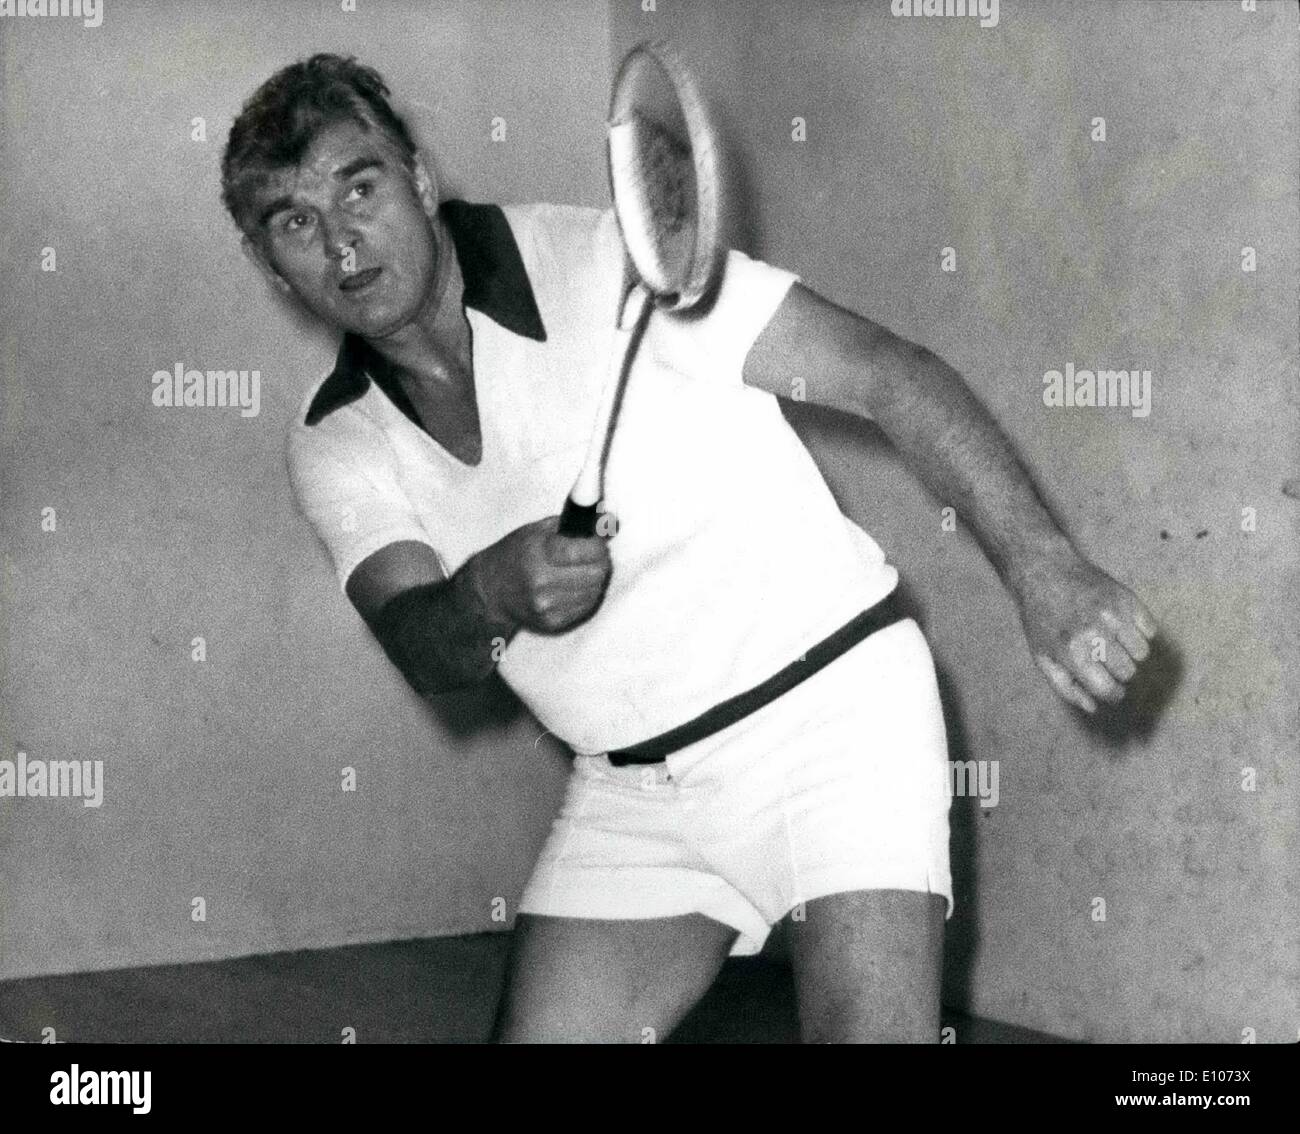 Feb. 02, 1970 - STEEL UNION BOSS BILL KEEPS FIT PLAYING SQUASH MR BILL SIRS, the General Secretary of the Iron and Steel Trades Stock Photo